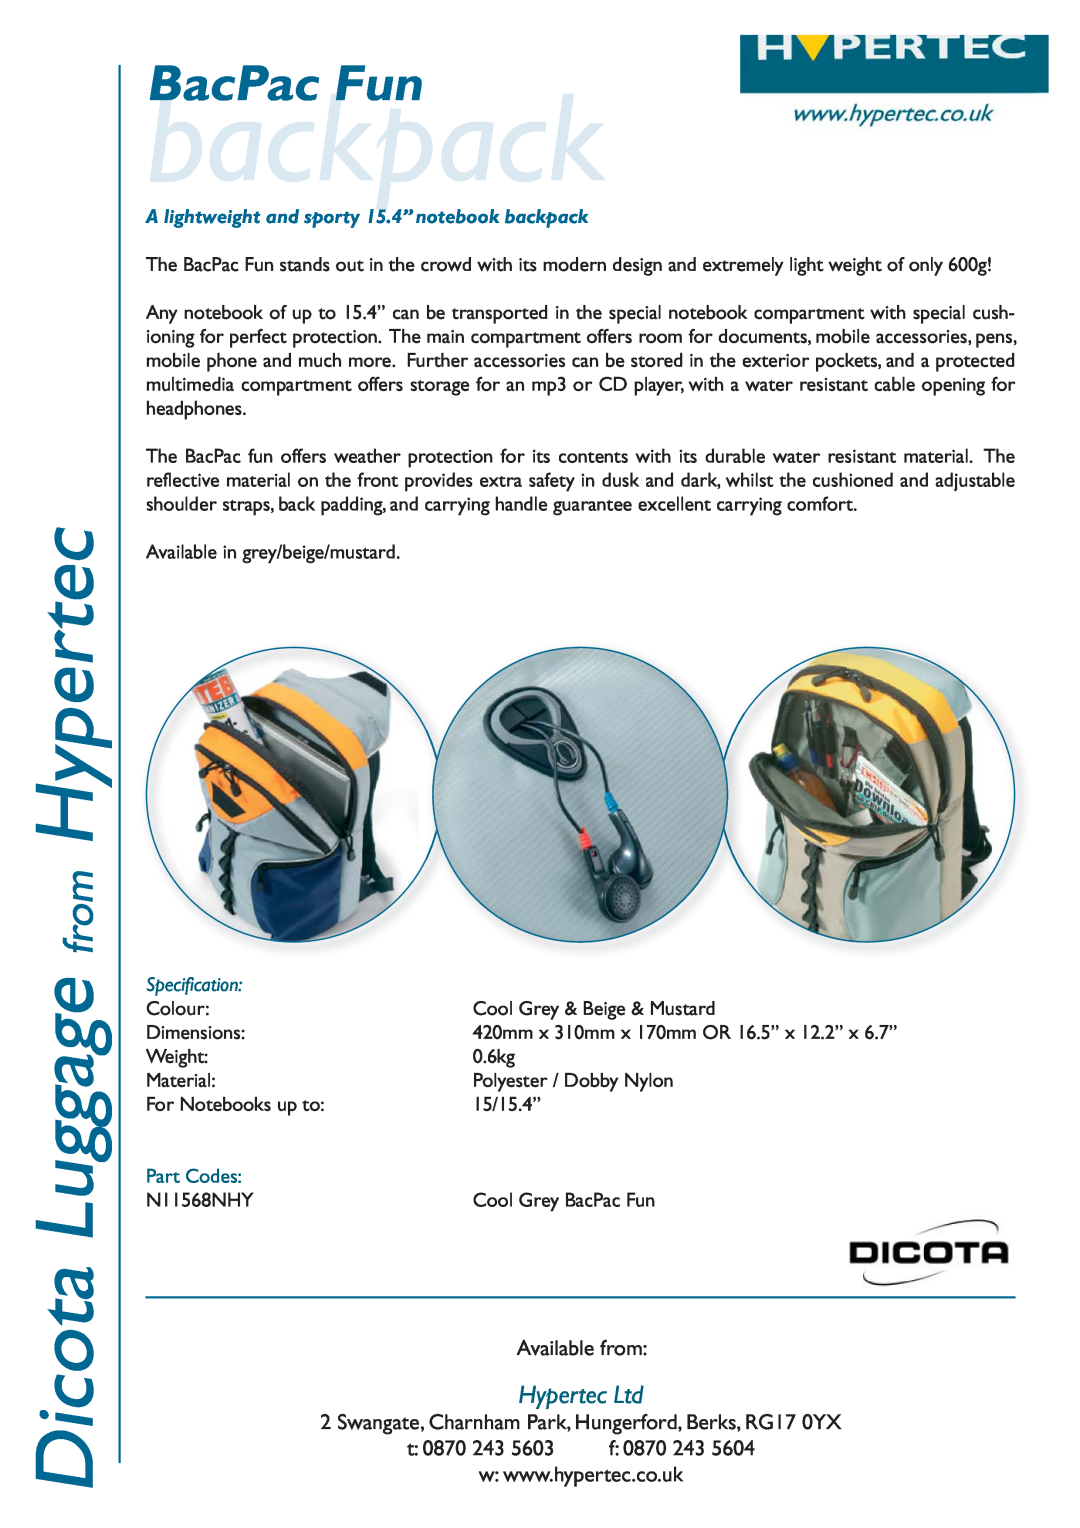 Dicota N11568NHY dimensions backpack, Dicota Luggage from Hypertec, BacPac Fun, Available from, t 0870 243, Specification 